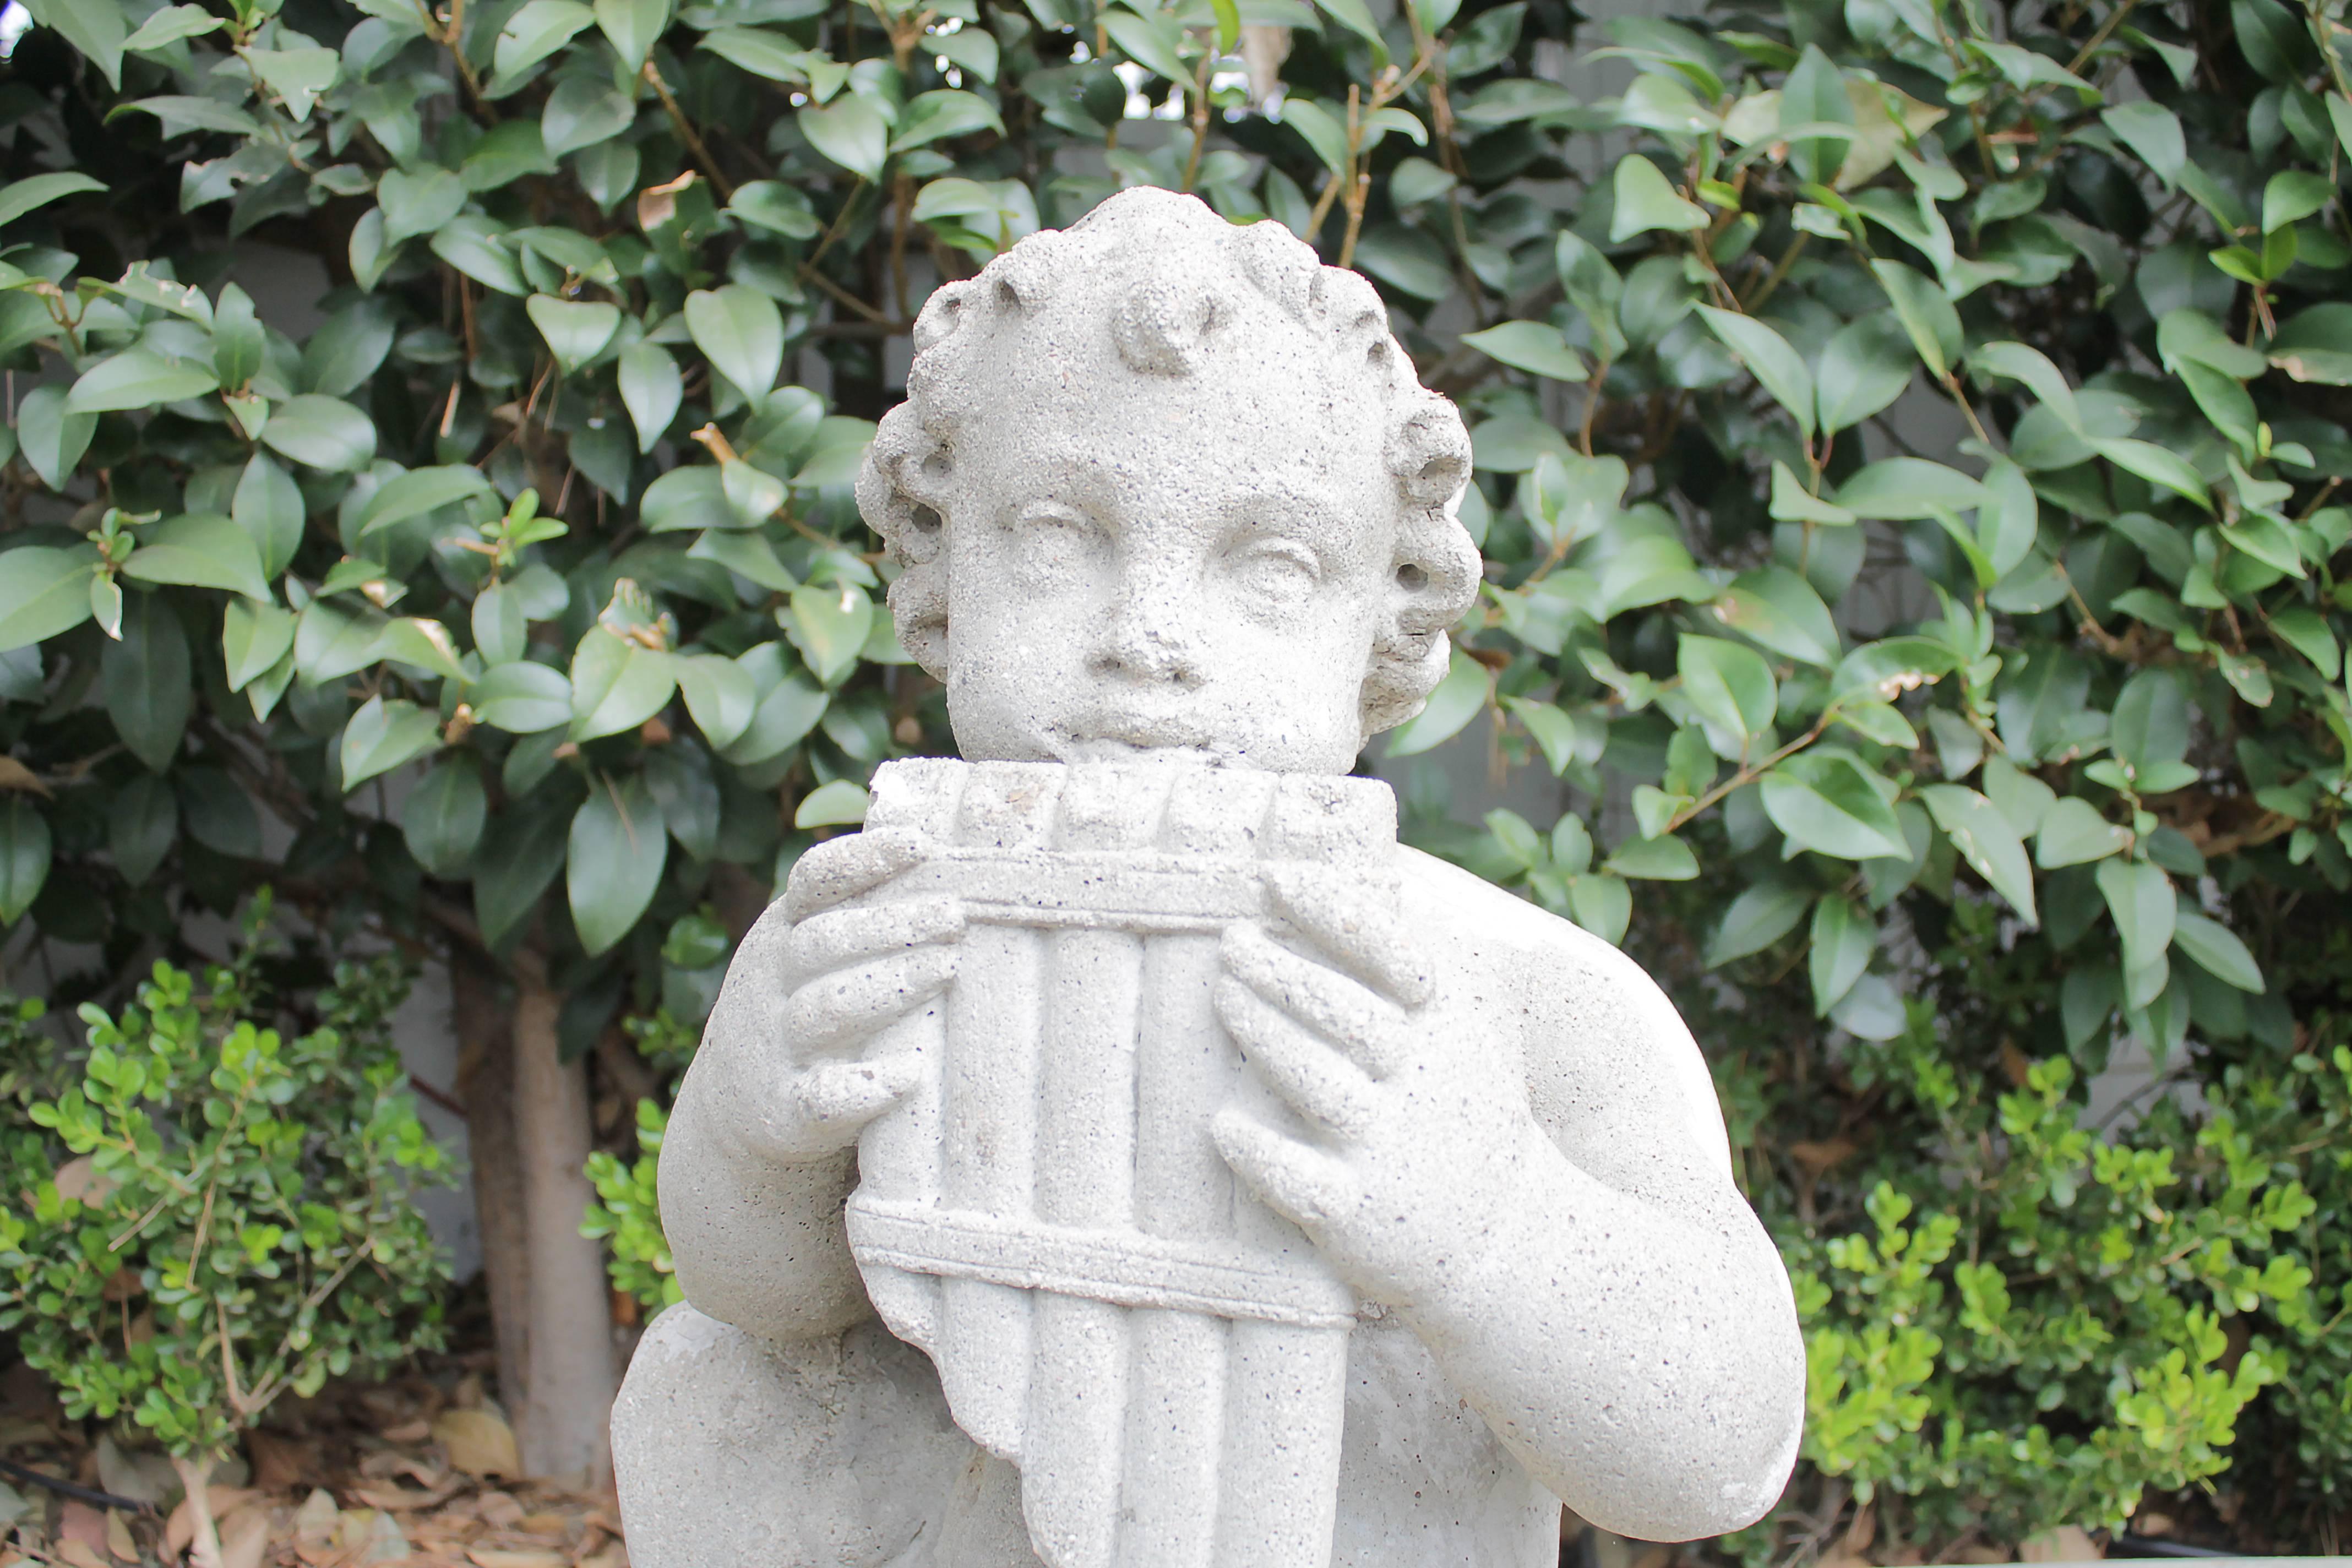 Vintage cast stone cherub with musical instrument
Measures: 15